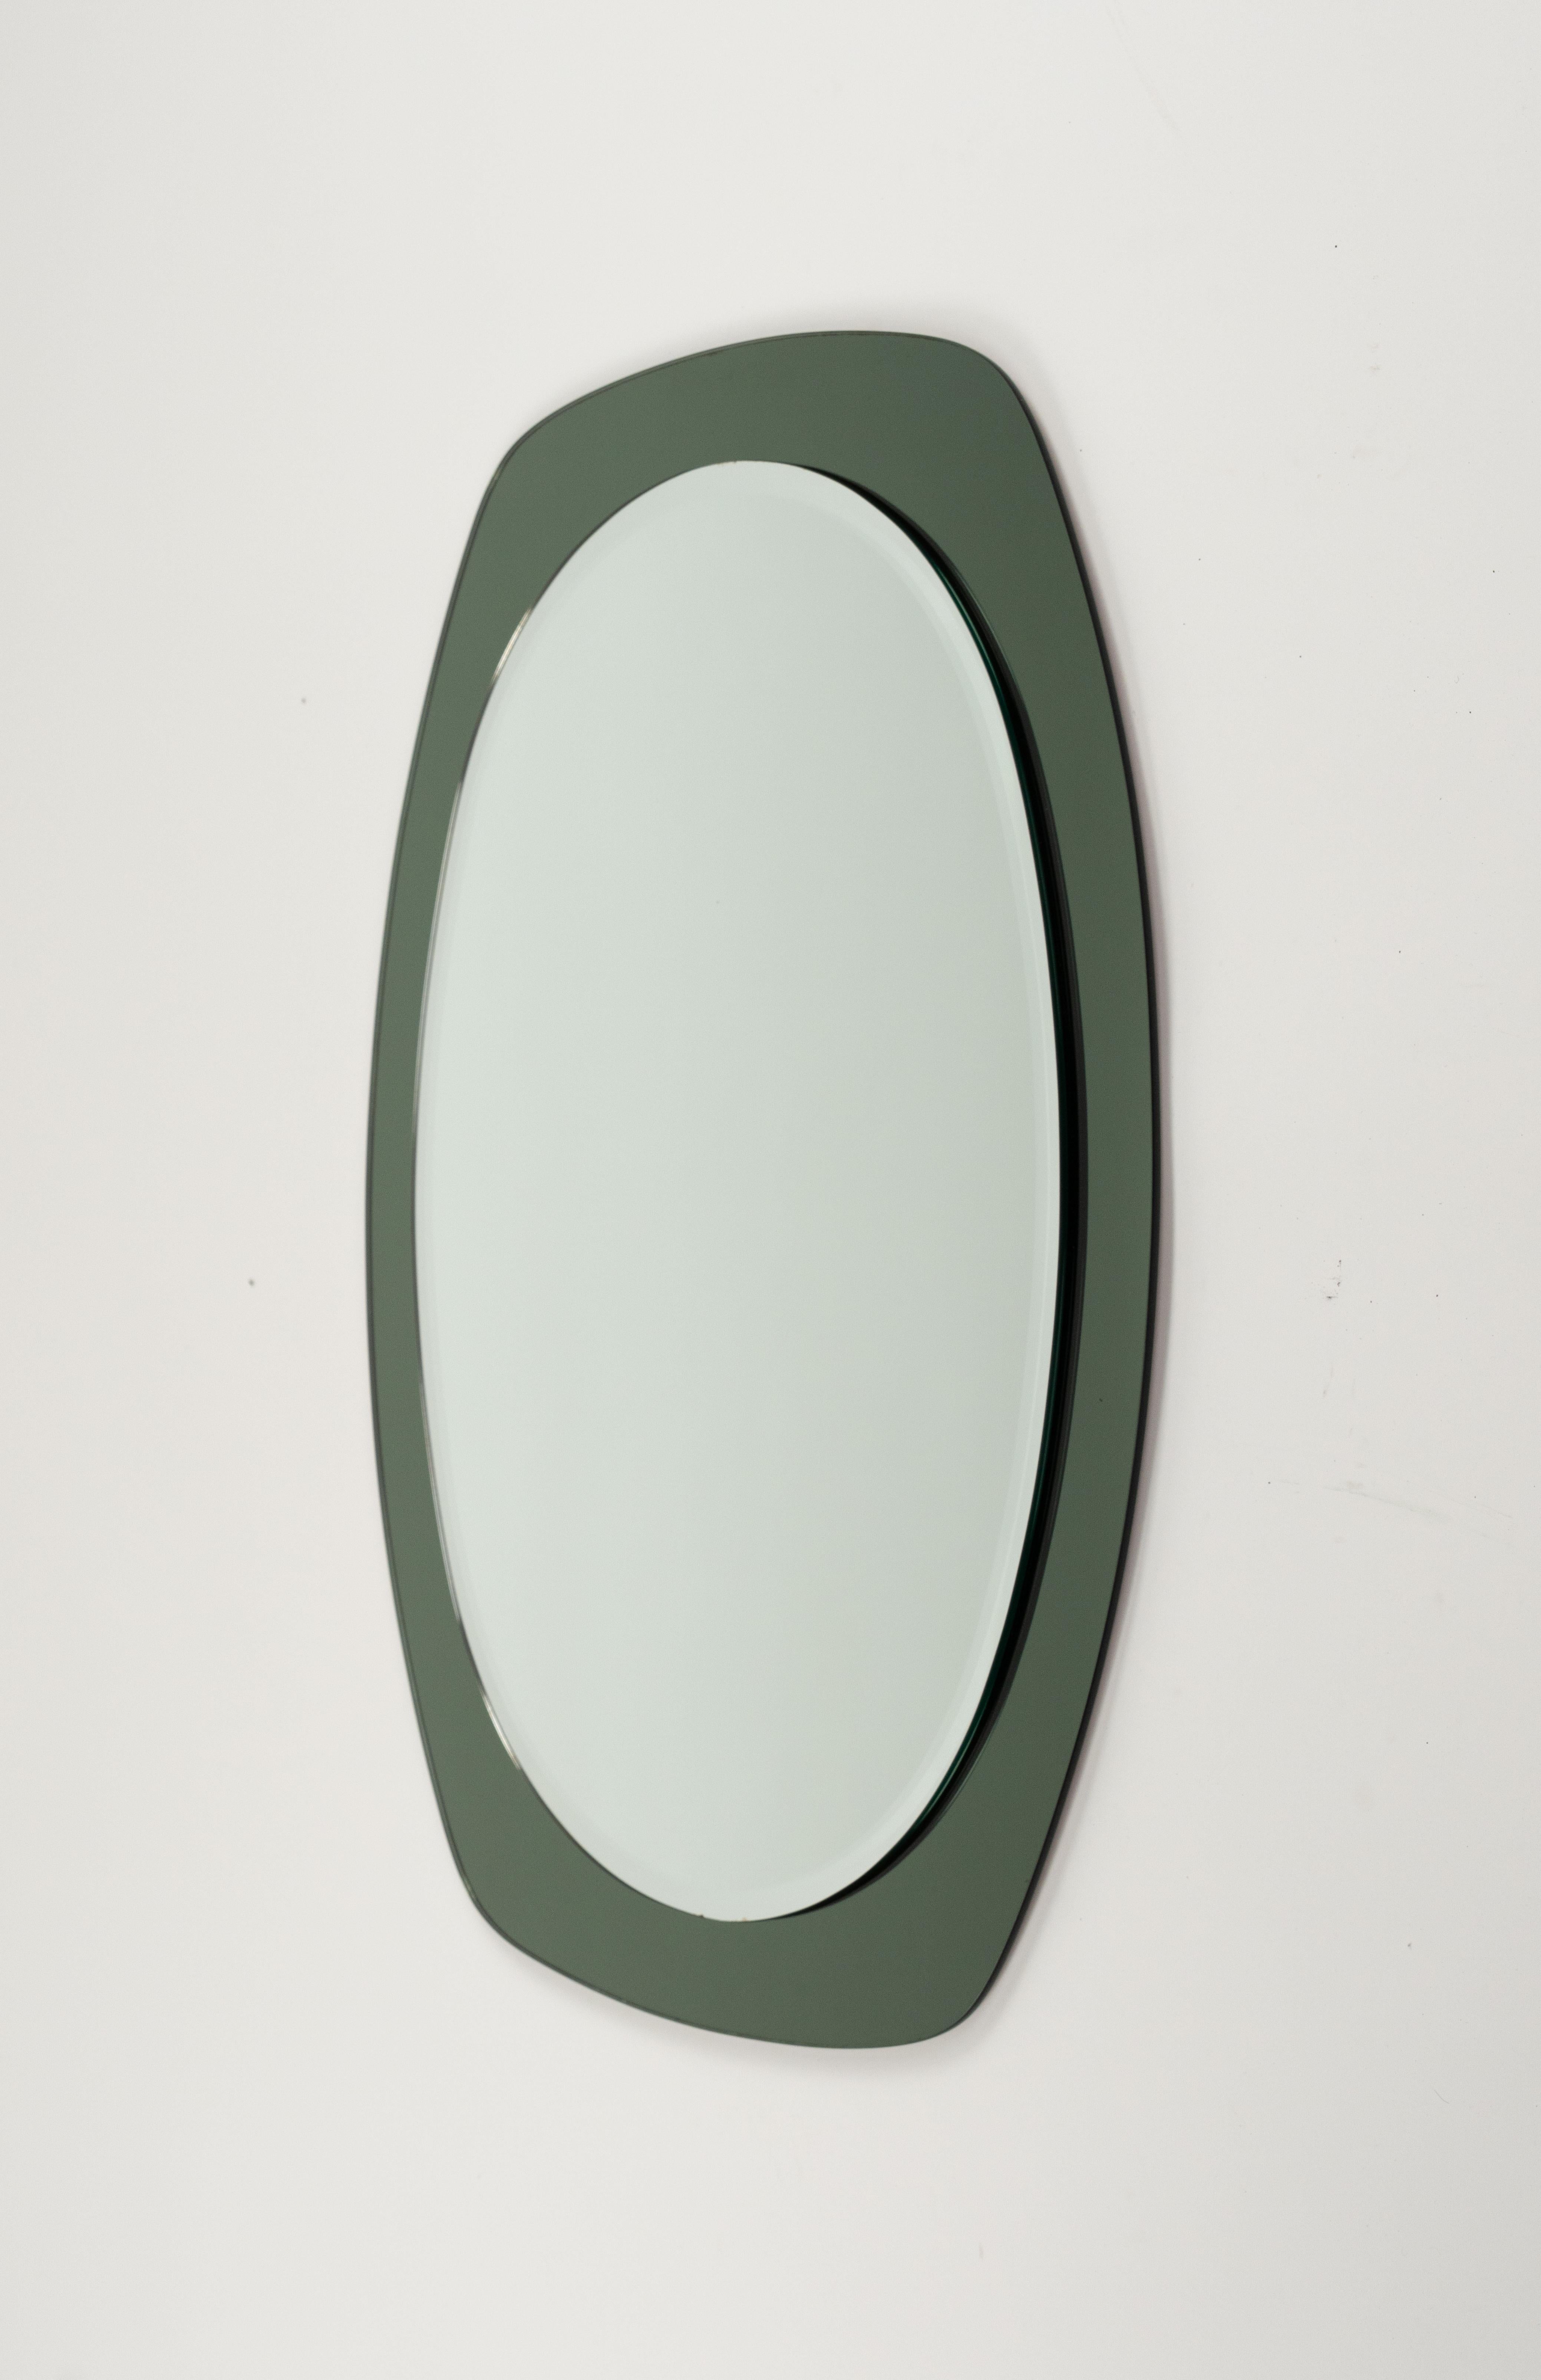 Mid-Century Modern Midcentury Cristal Art Oval Wall Mirror with Green Frame, Italy 1960s For Sale